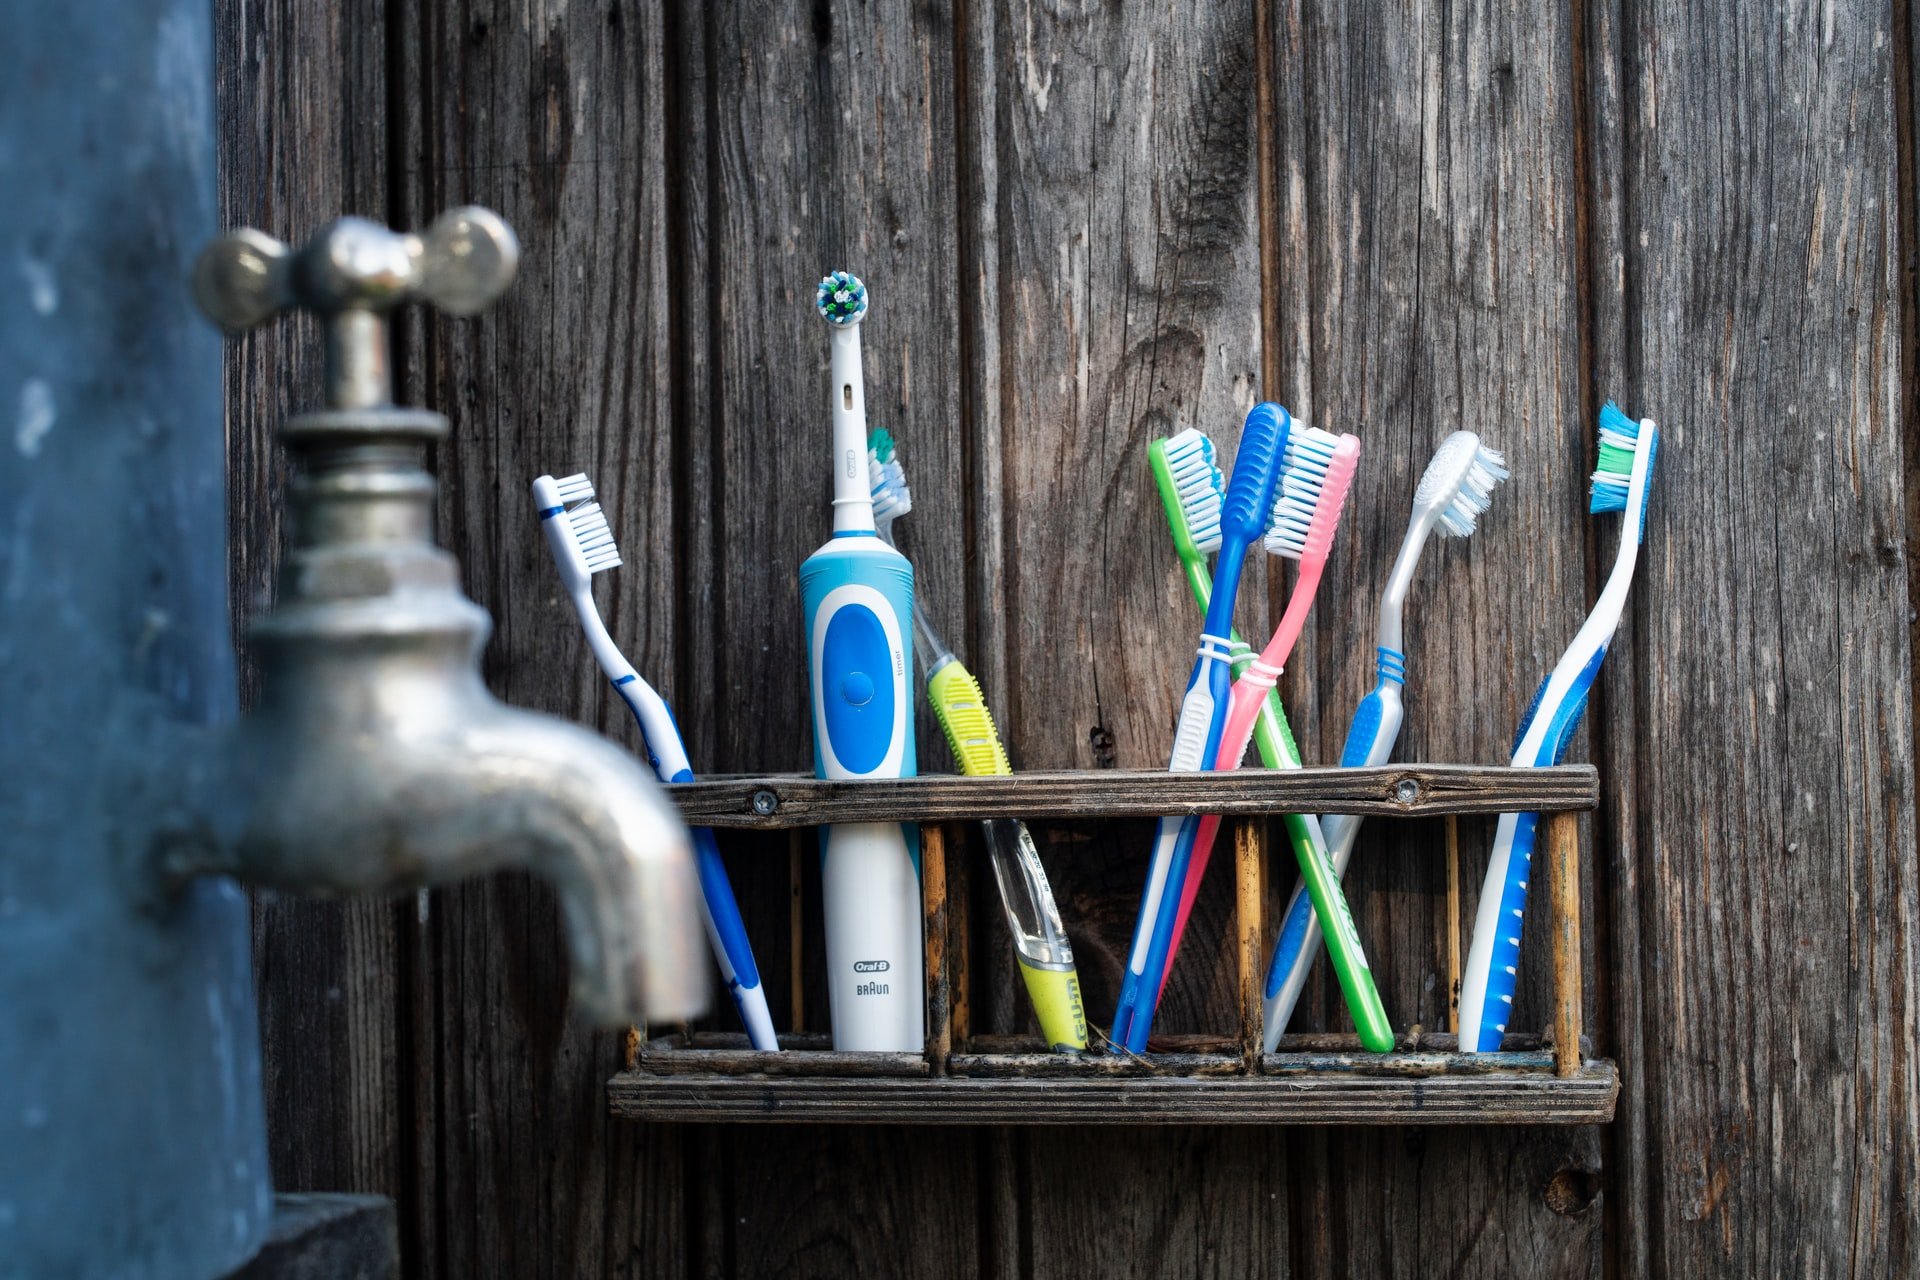 Toothbrushes in the man's bathroom | Source: Unsplash 